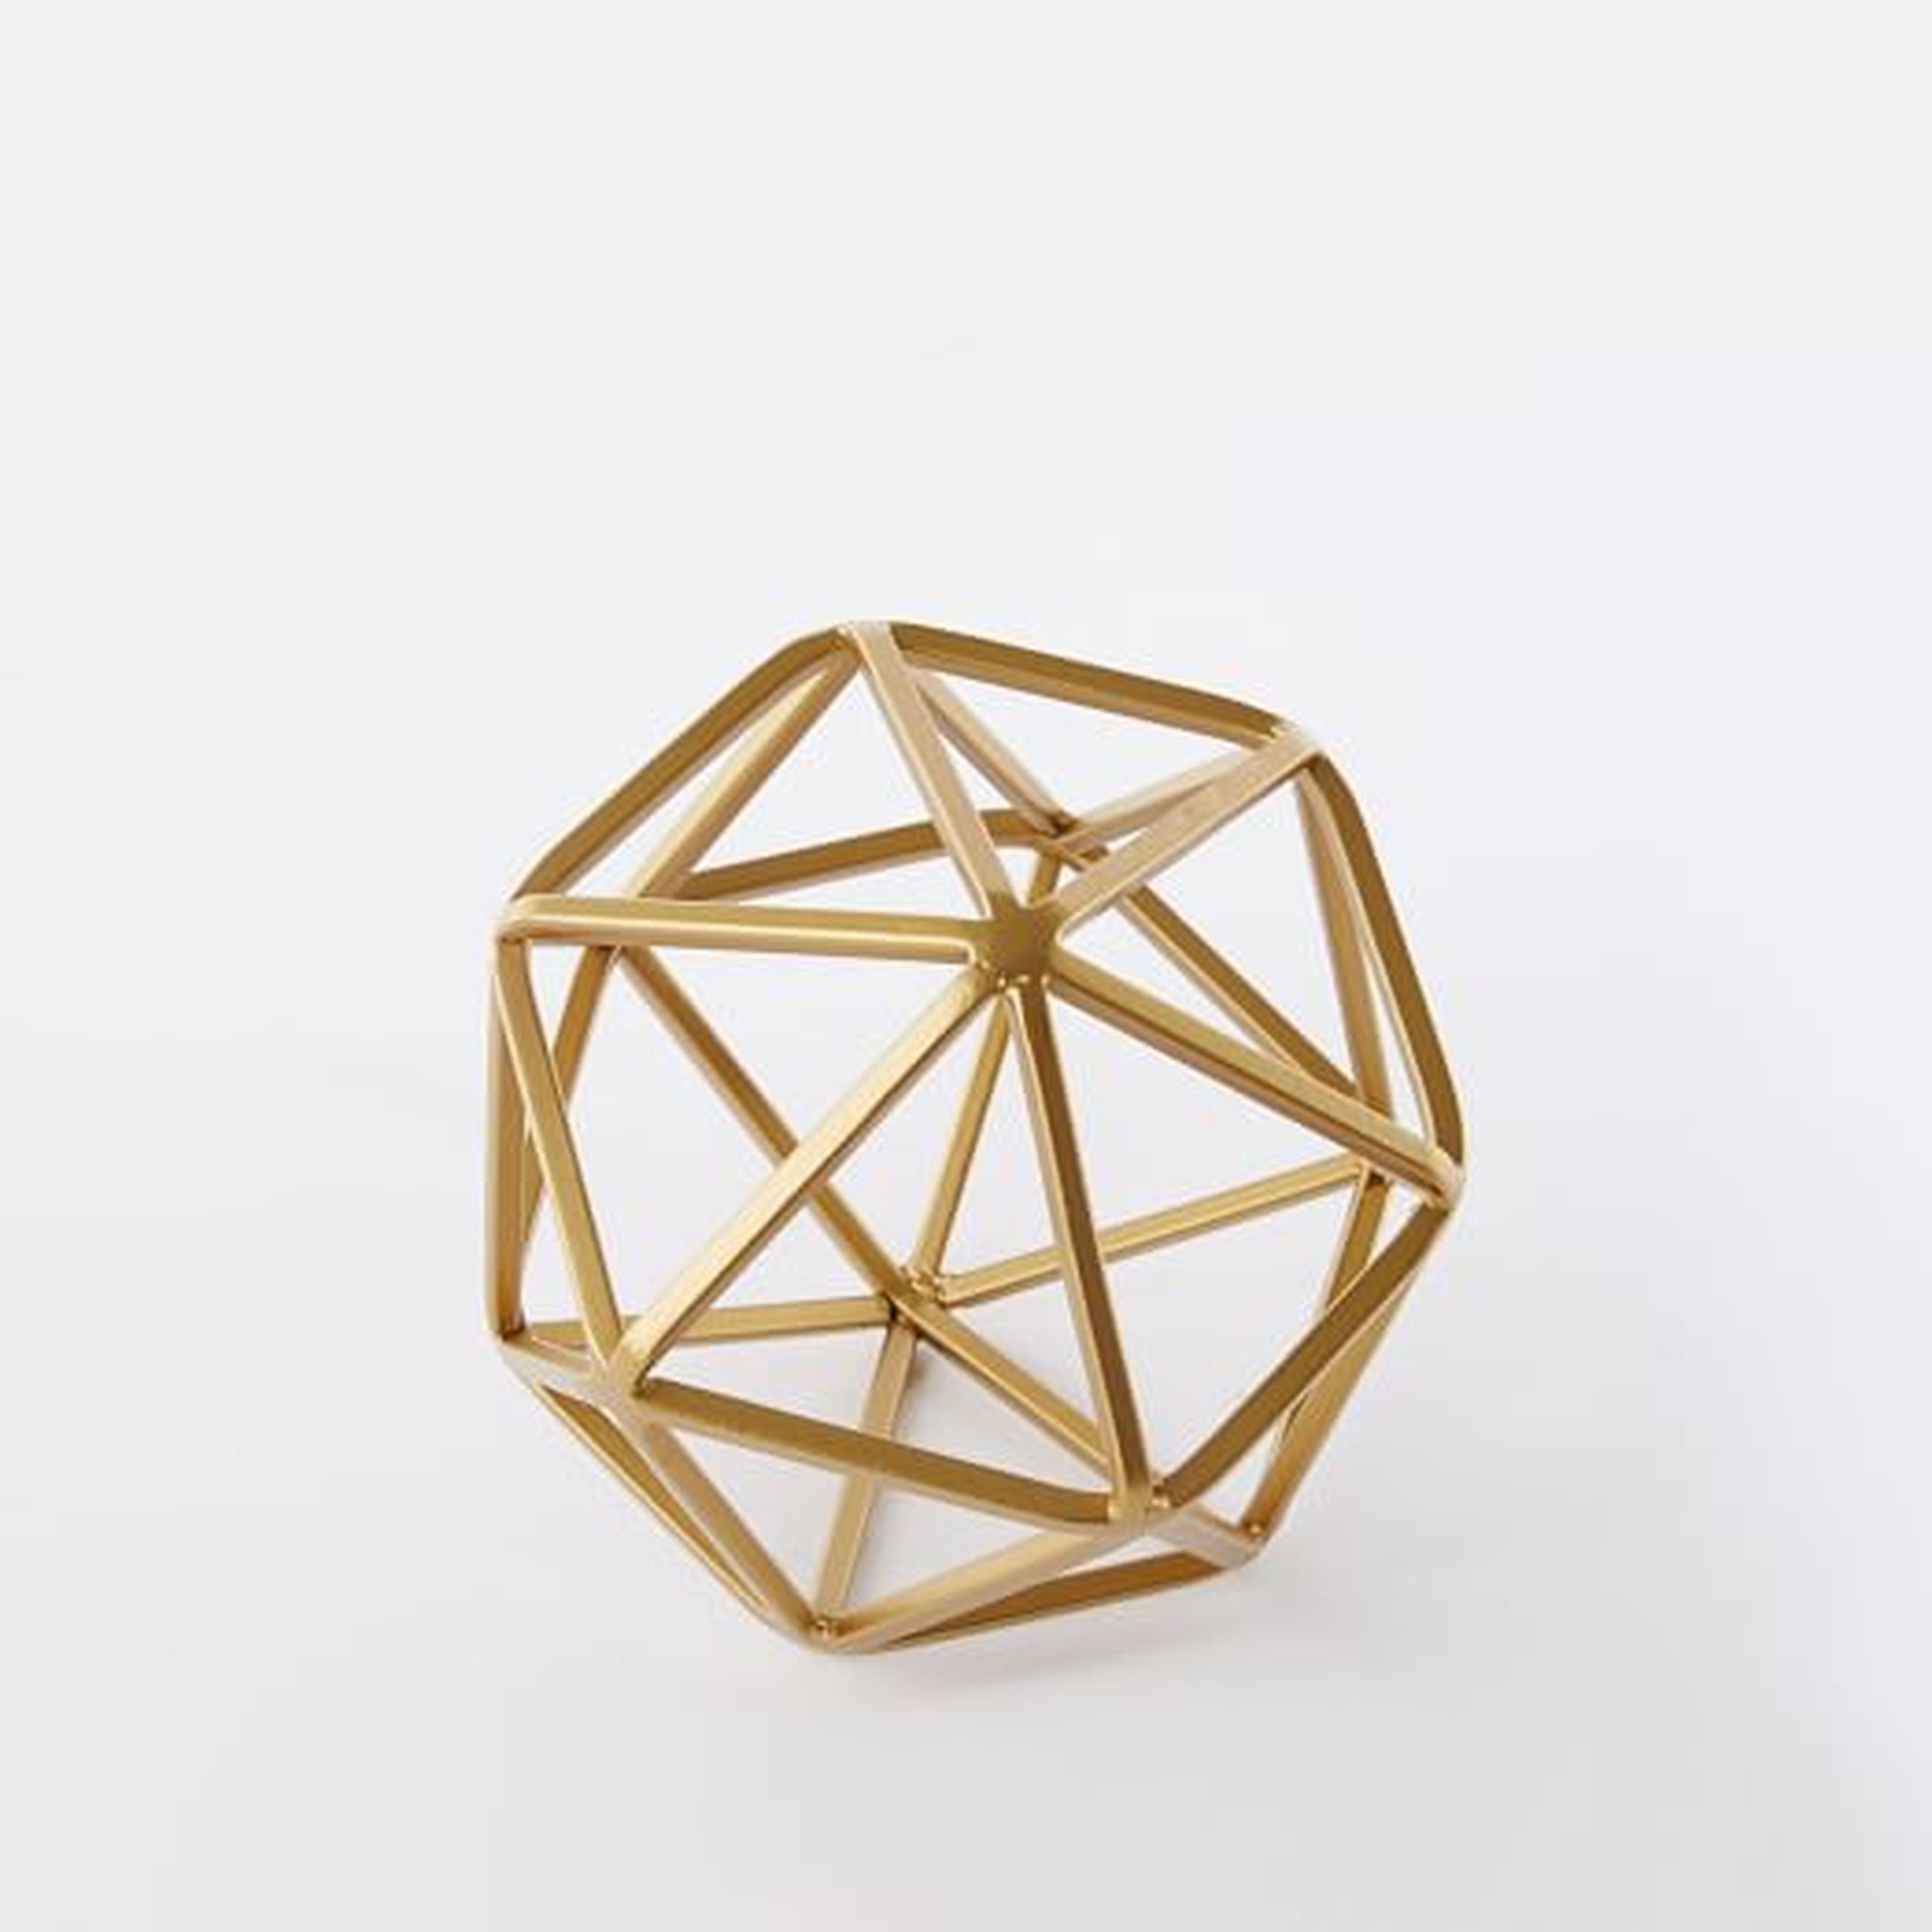 Symmetry Objects, Small Octahedron, Copper - West Elm